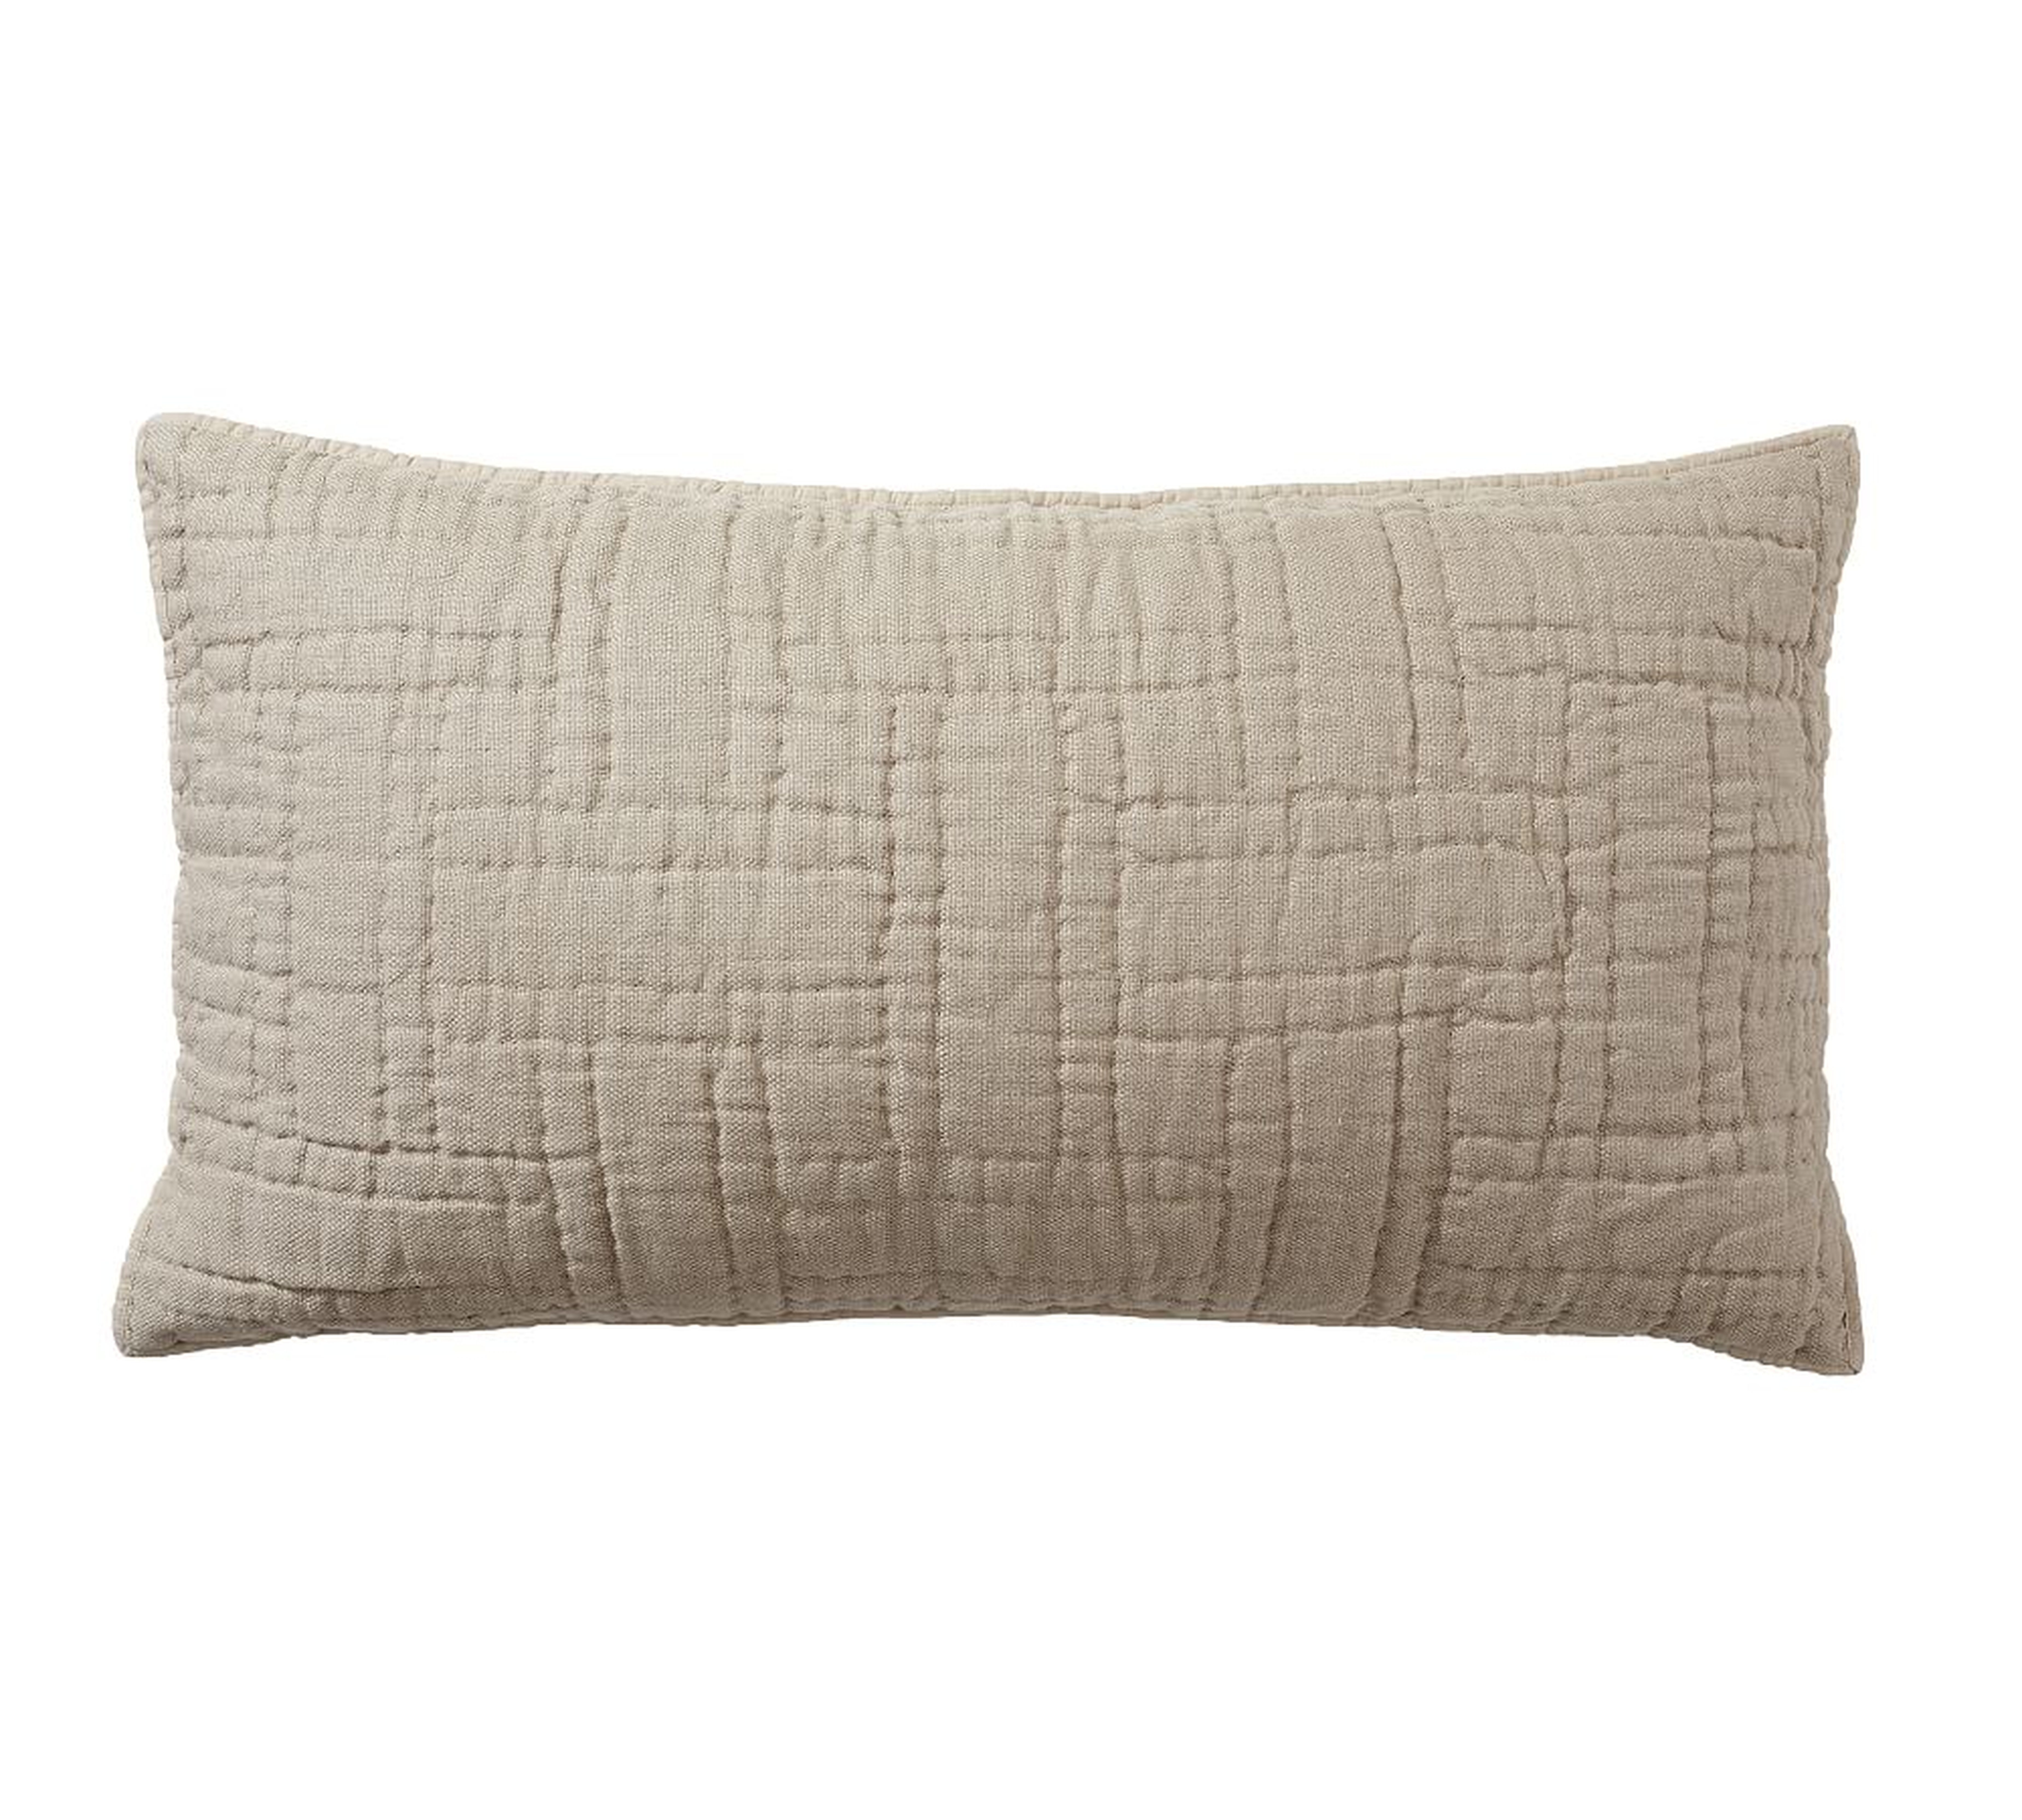 Neutral Belgian Flax Linen Handcrafted Basketweave Quilted Sham, King - Pottery Barn